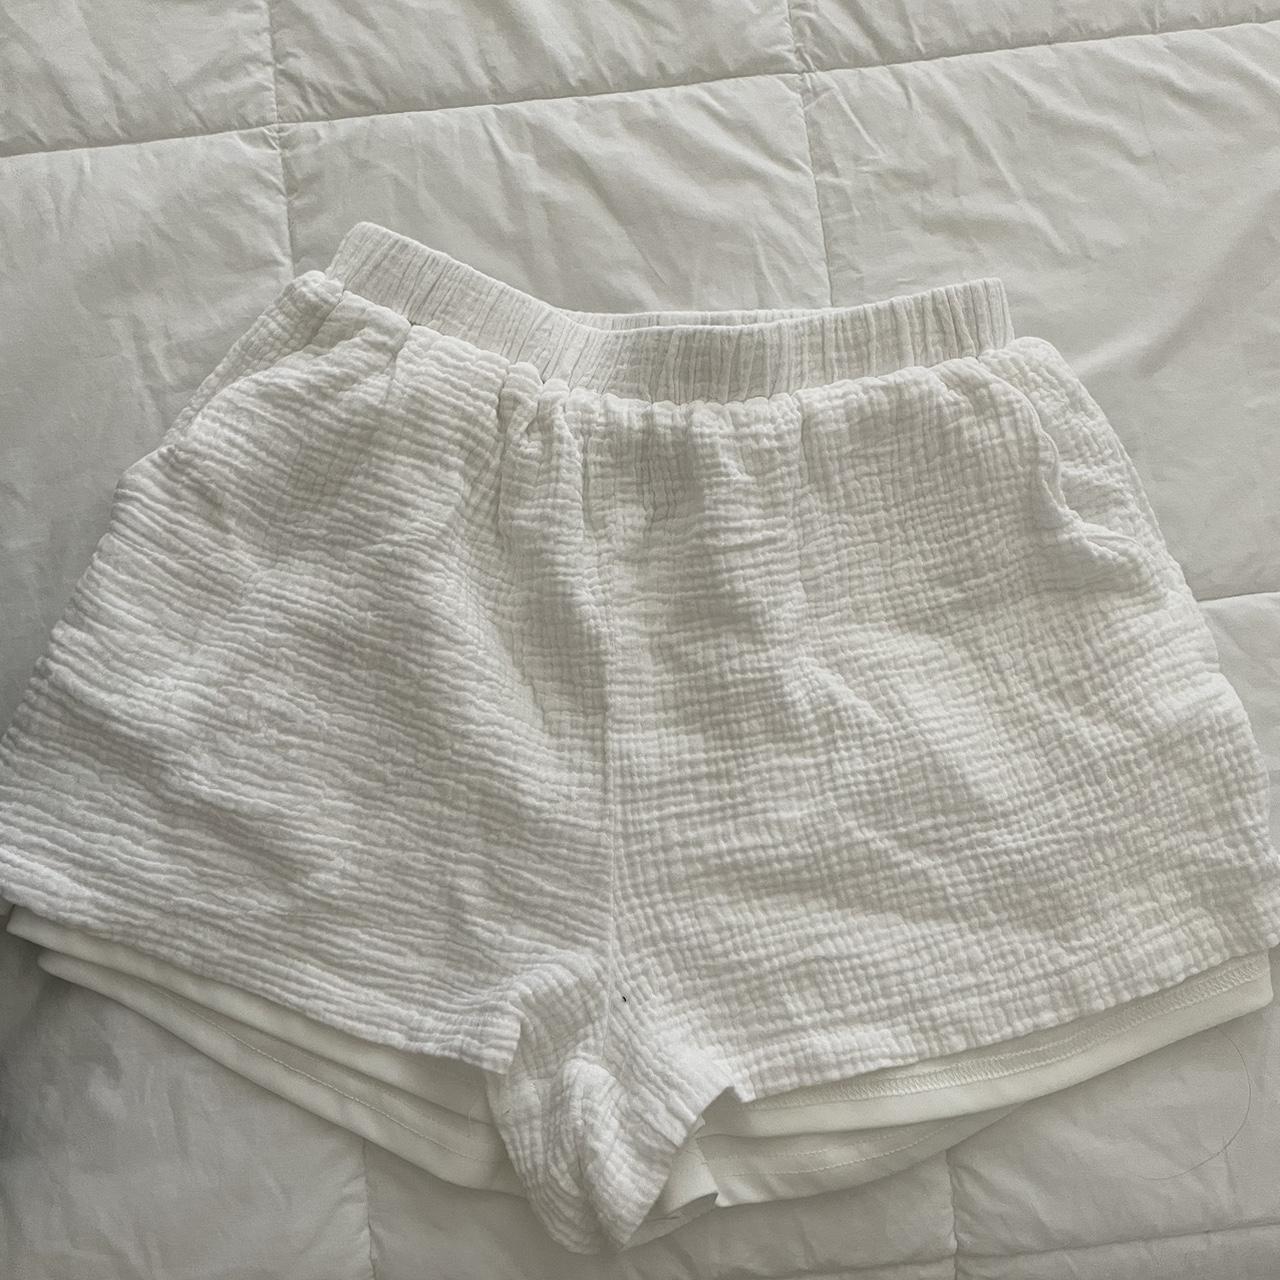 NWOT princess polly mateo shorts in white! super... - Depop